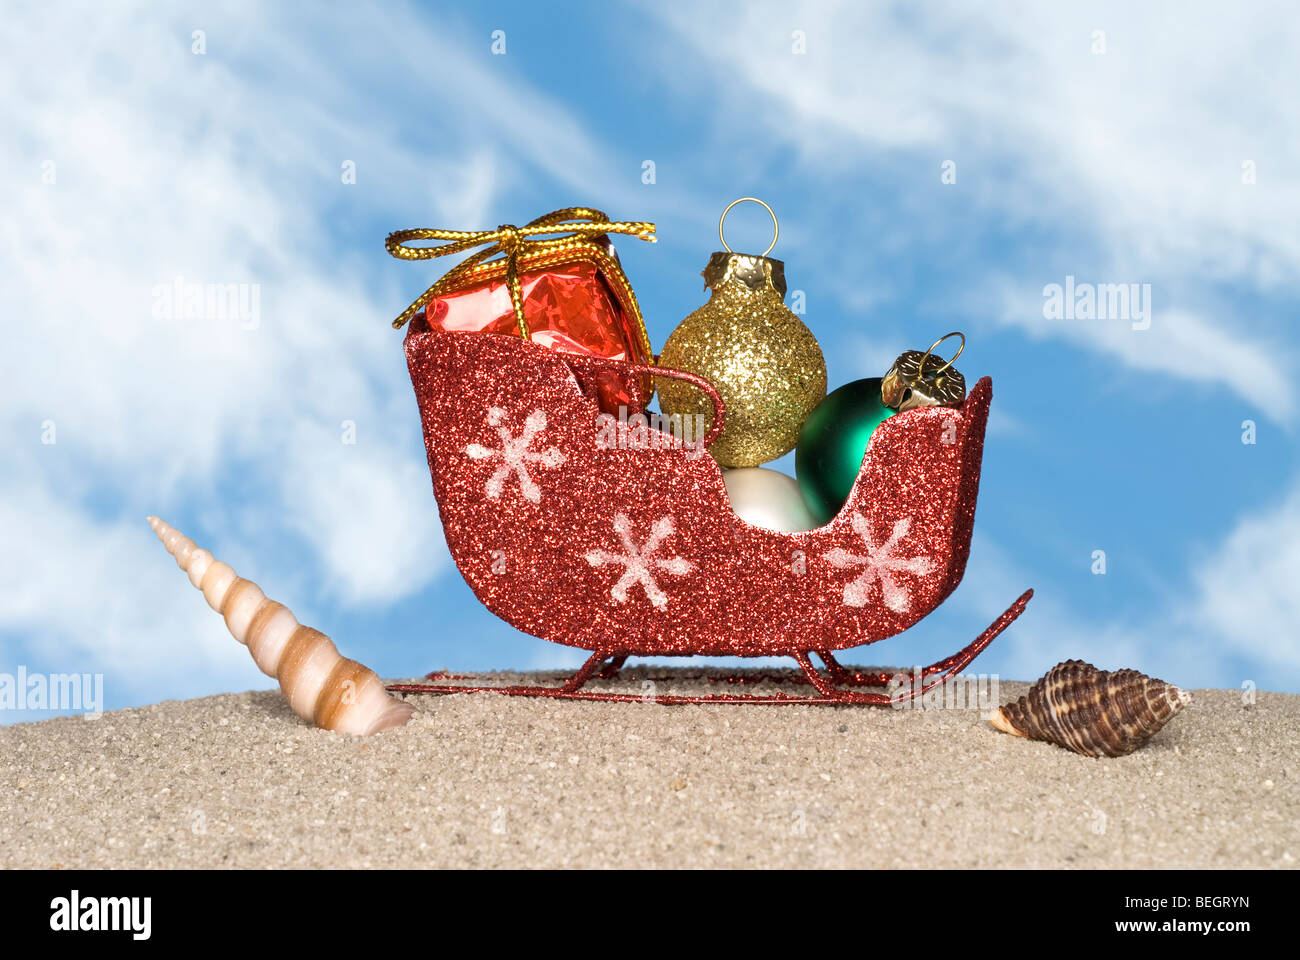 Santa's sleigh, loaded with ornaments and presents, on a sandy beach with seashells. Stock Photo